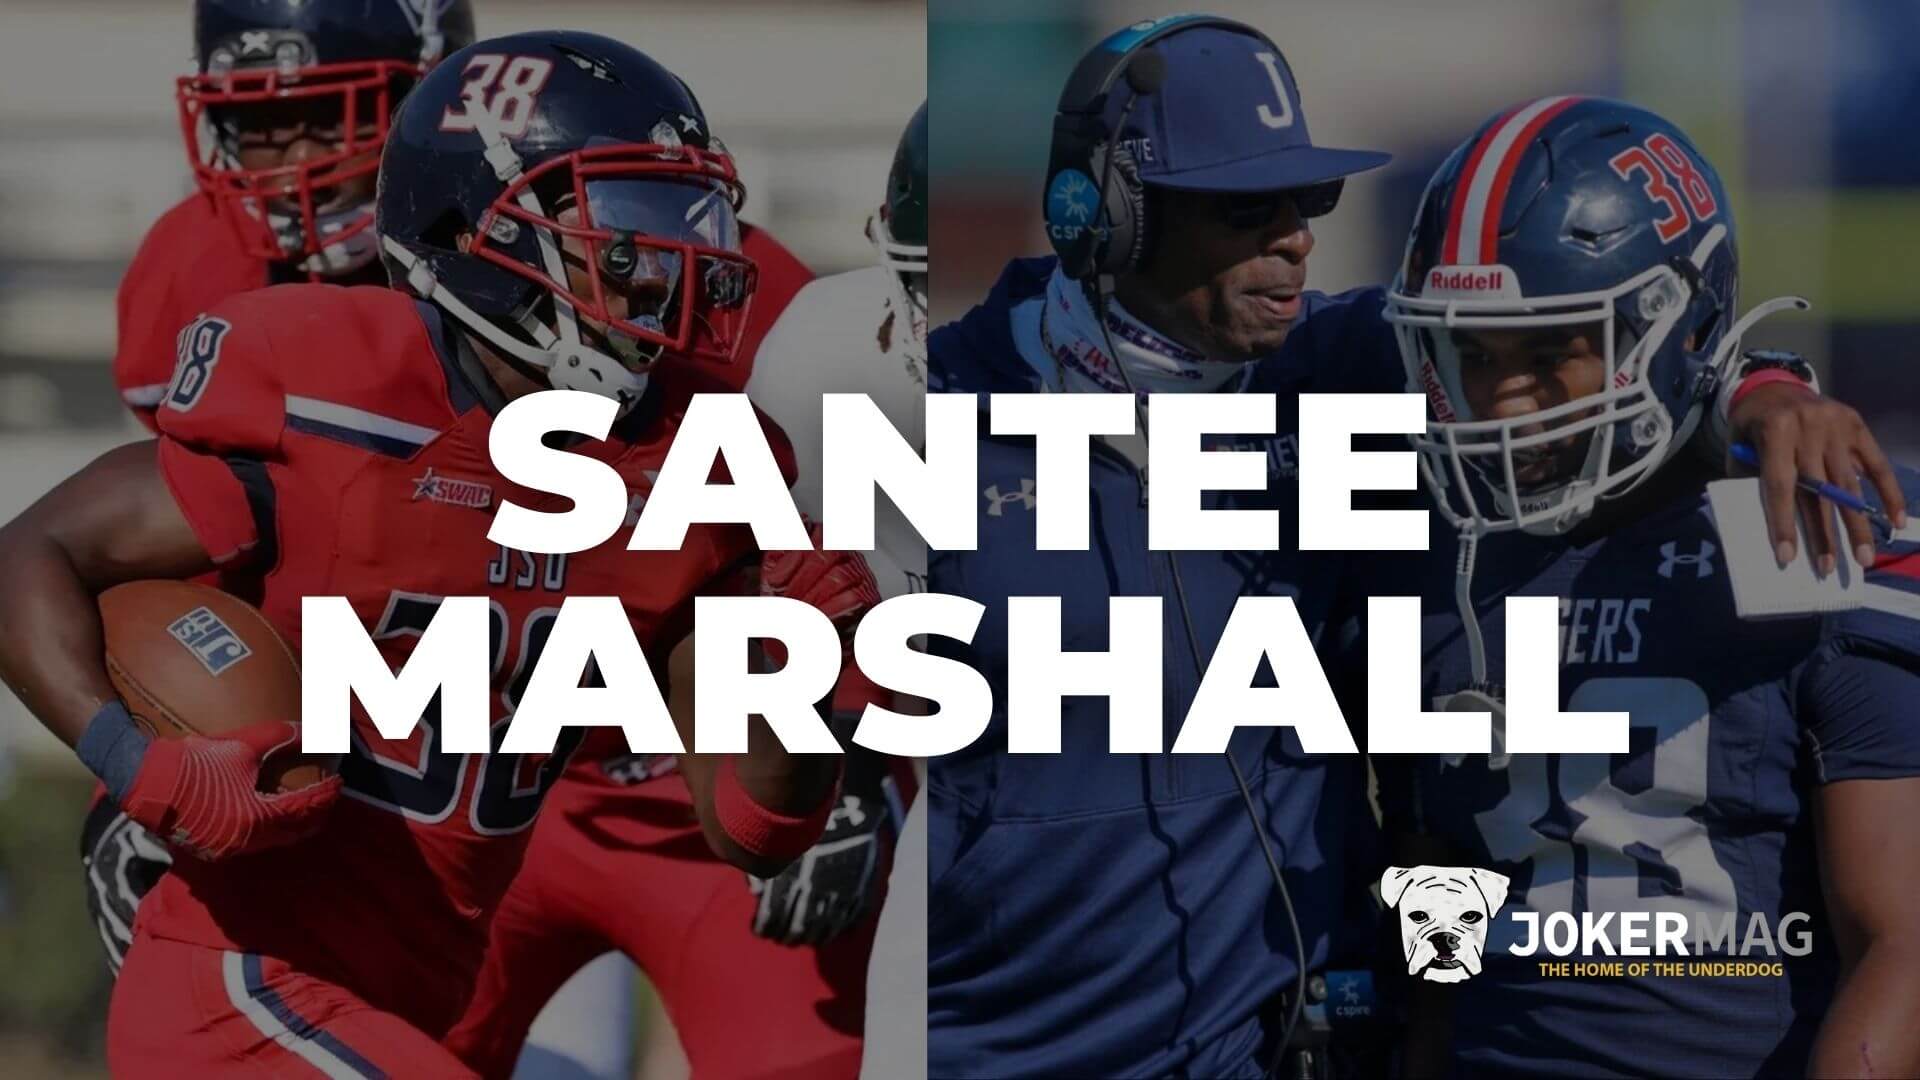 Jackson State running back Santee Marshall sits down for an exclusive interview with Joker Mag to share the story of his road to a D1 football scholarship